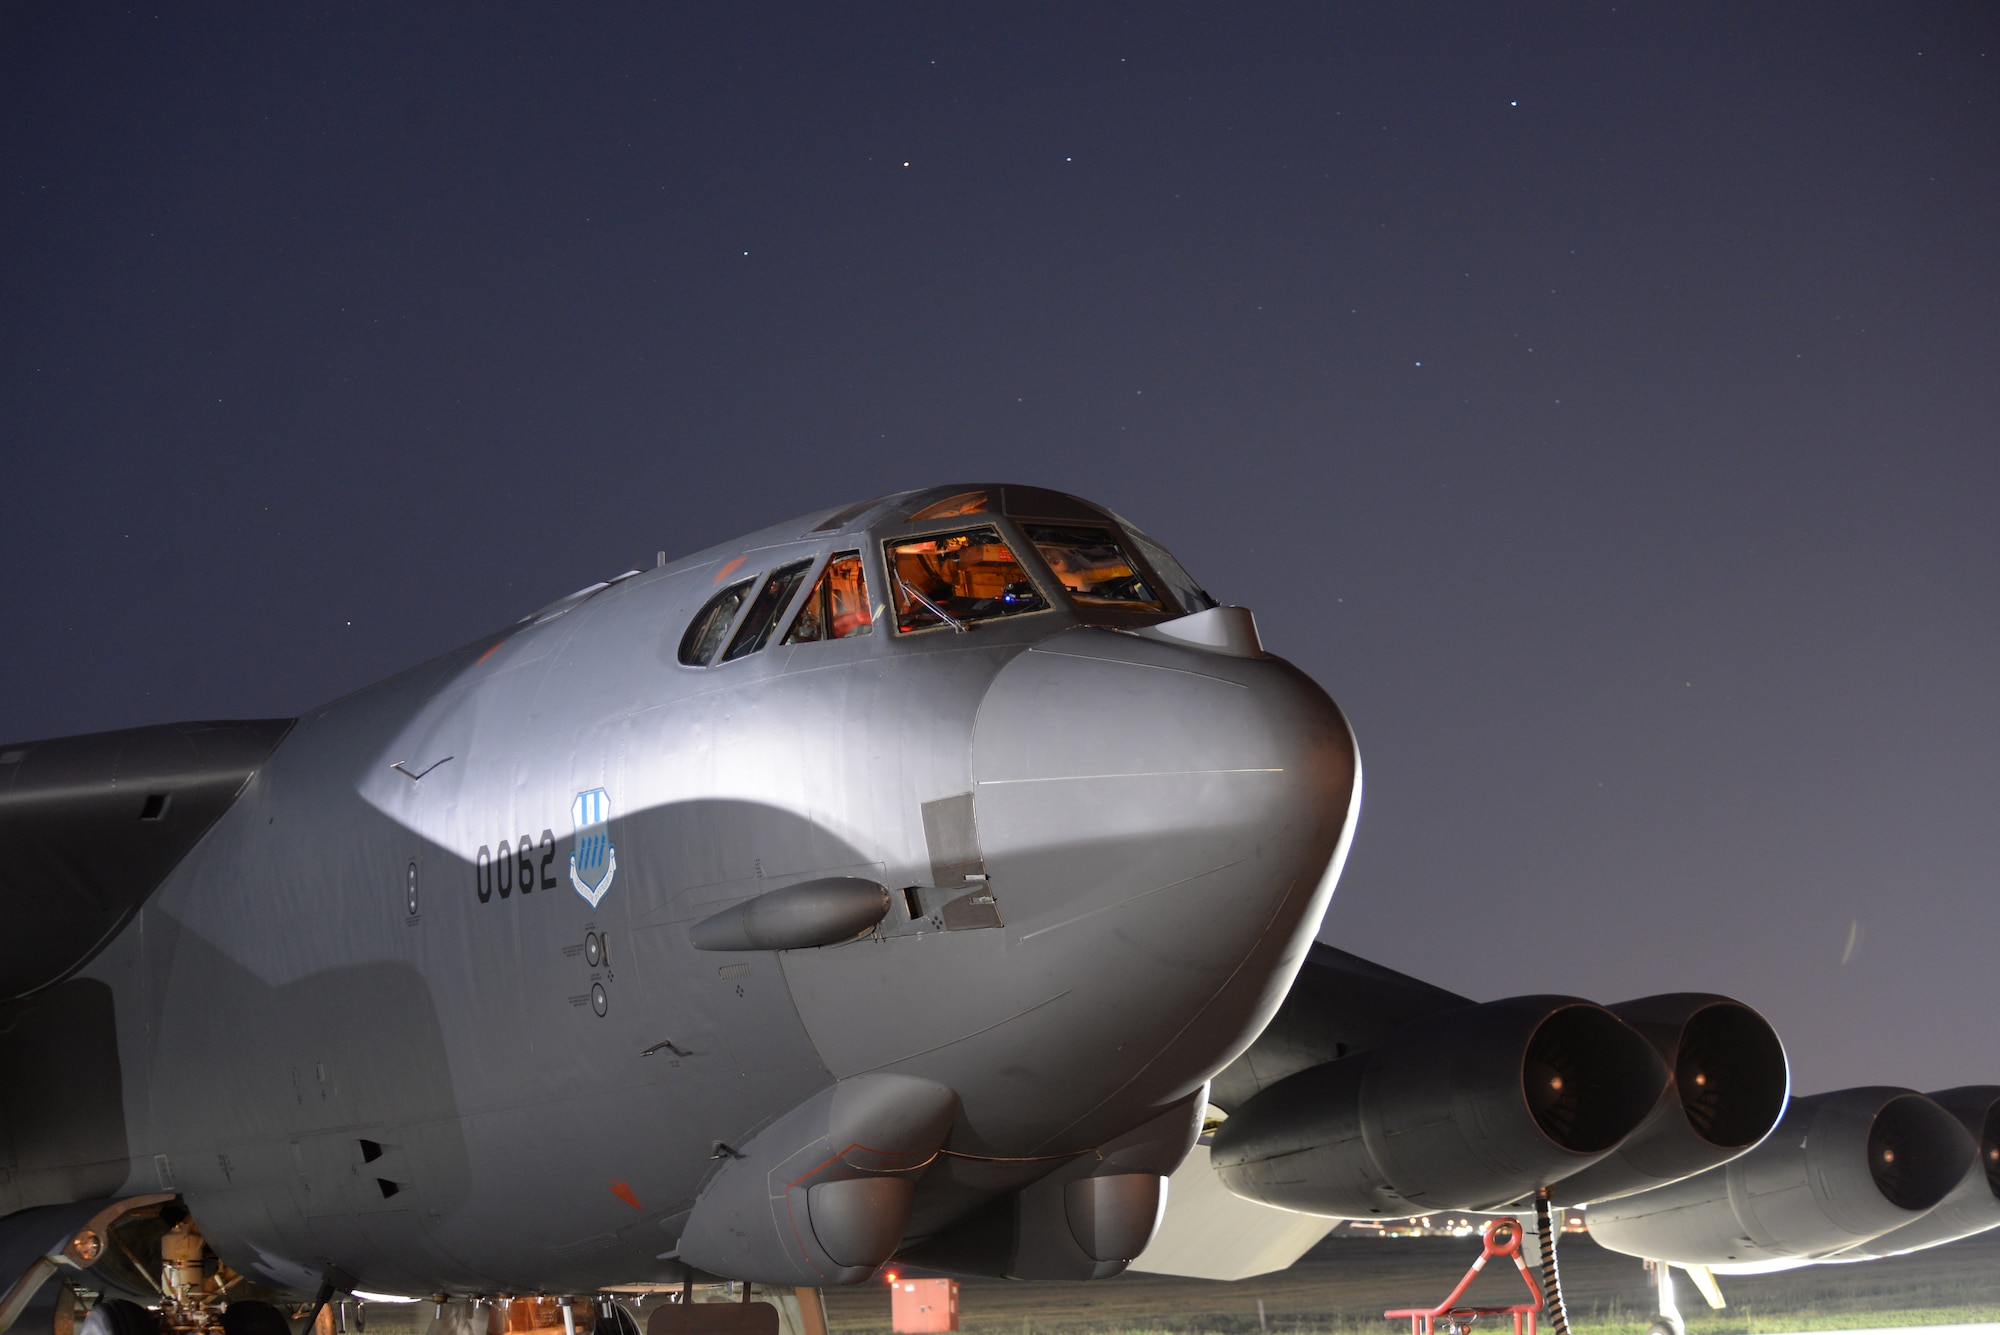 Airmen from the 96th Bomb Squadron, prepare a B-52H Stratofortress for takeoff at Ellsworth Air Force Base, South Dakota, prior to a 15.5-hour sortie to the U.S. Southern Command area of operations Aug. 11, 2014. Assigned to the 2nd Bomb Wing, Barksdale Air Force Base, Louisiana, the aircraft and seven-person aircrew participated in PANAMAX 2014, an annual U.S. Southern Command-sponsored exercise designed to provide multinational interoperability training in complex operations. (U.S. Air Force photo by Airman 1st Class Rebecca Imwalle)